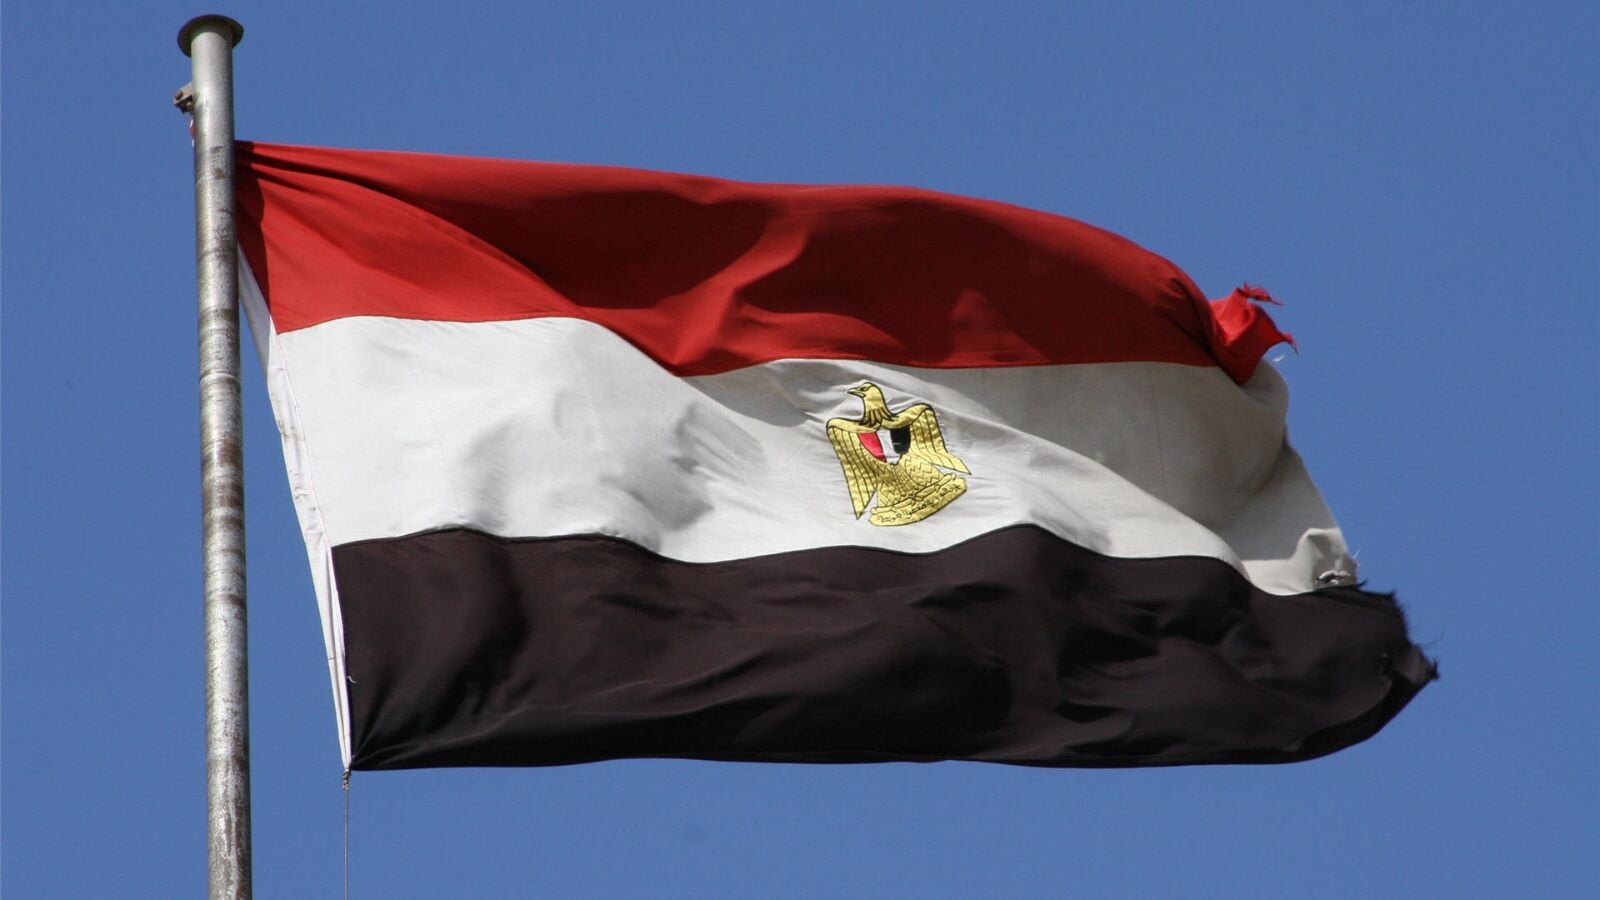 Giant National Egypt Egyptian Flag علم مصر eulim misr Speedy Delivery